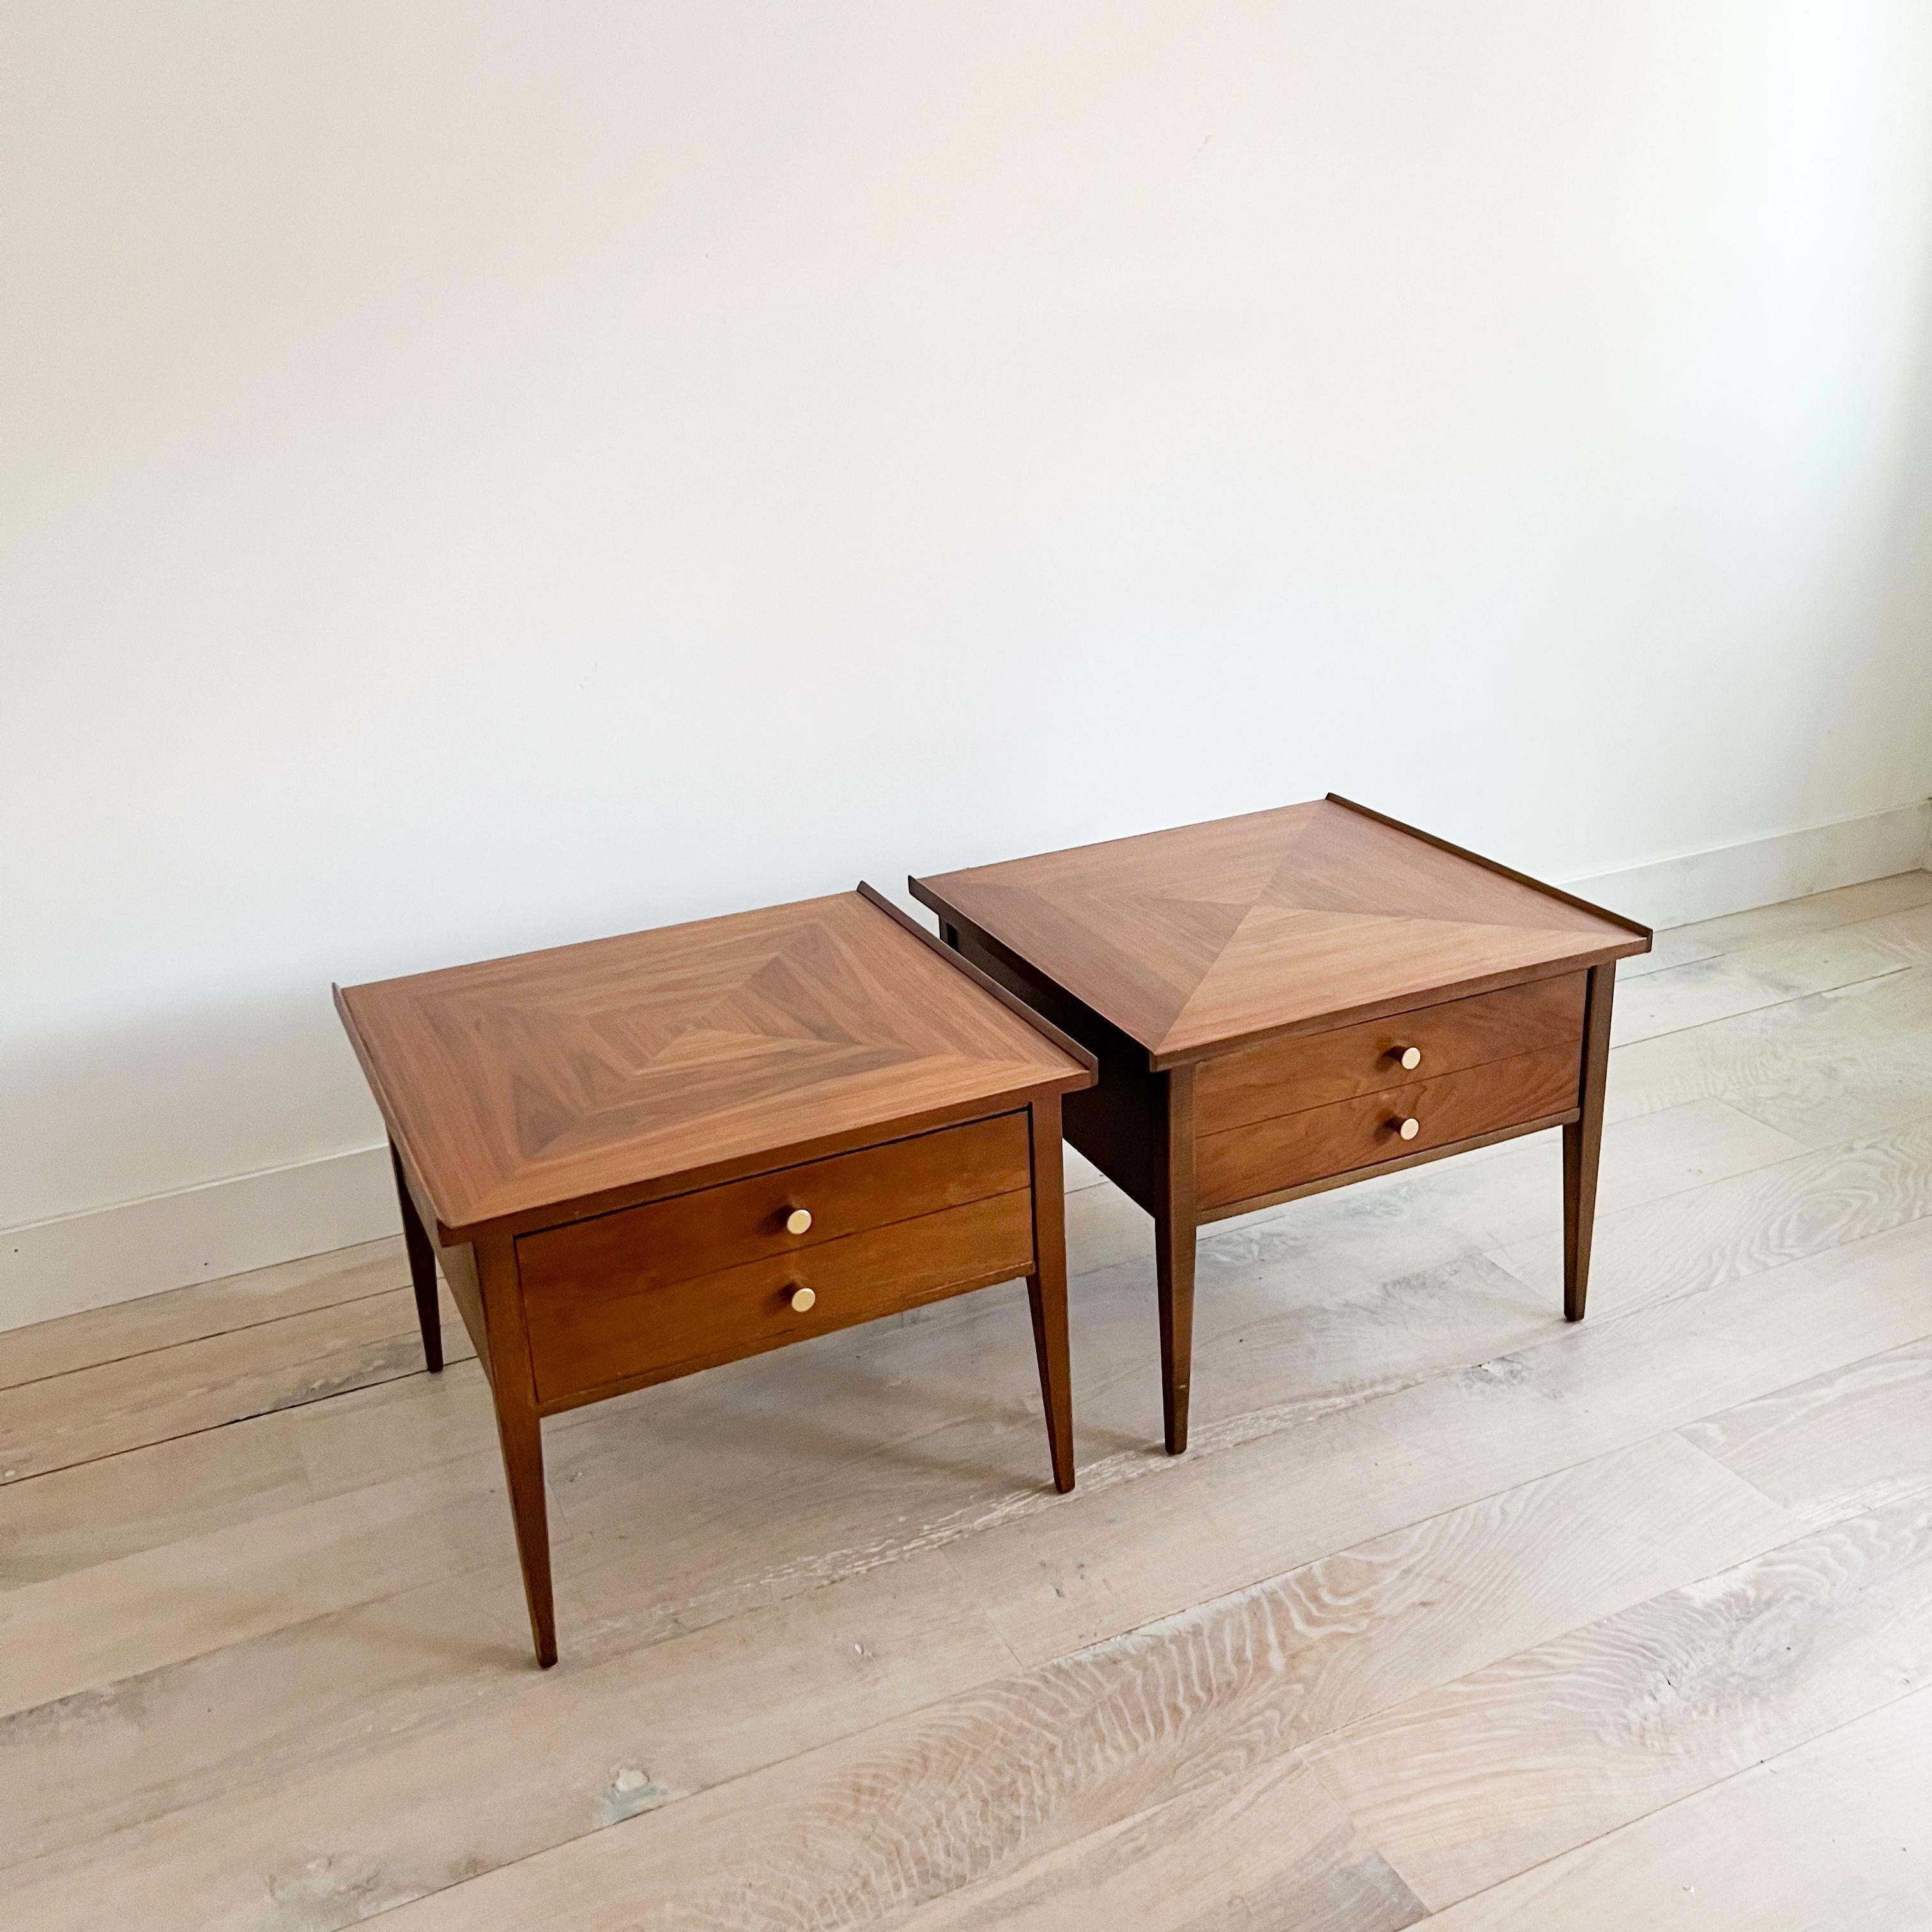 Pair of mid century modern walnut end tables by American of Martinsville. New brass drawer pulls. The tops have been sanded and restored. Stunning wood grain! Some light scuffing/scratching from age appropriate wear.

25.75”x25” 20.5”H